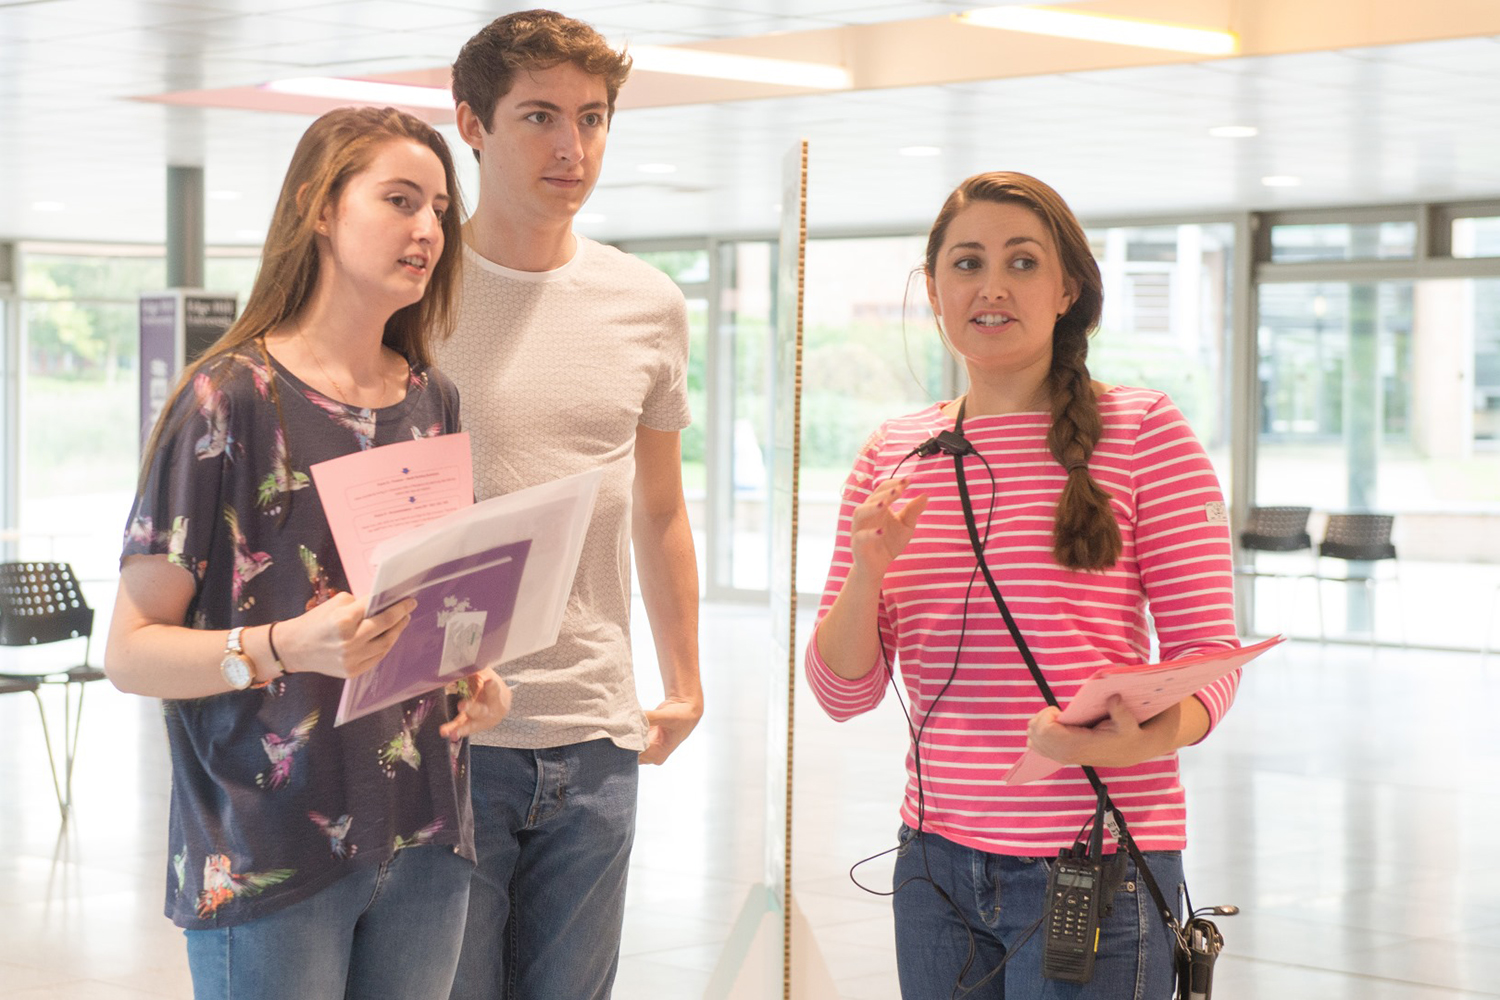 Students receive advice from a member of staff in the Faculty of Health, Social Care and Medicine.